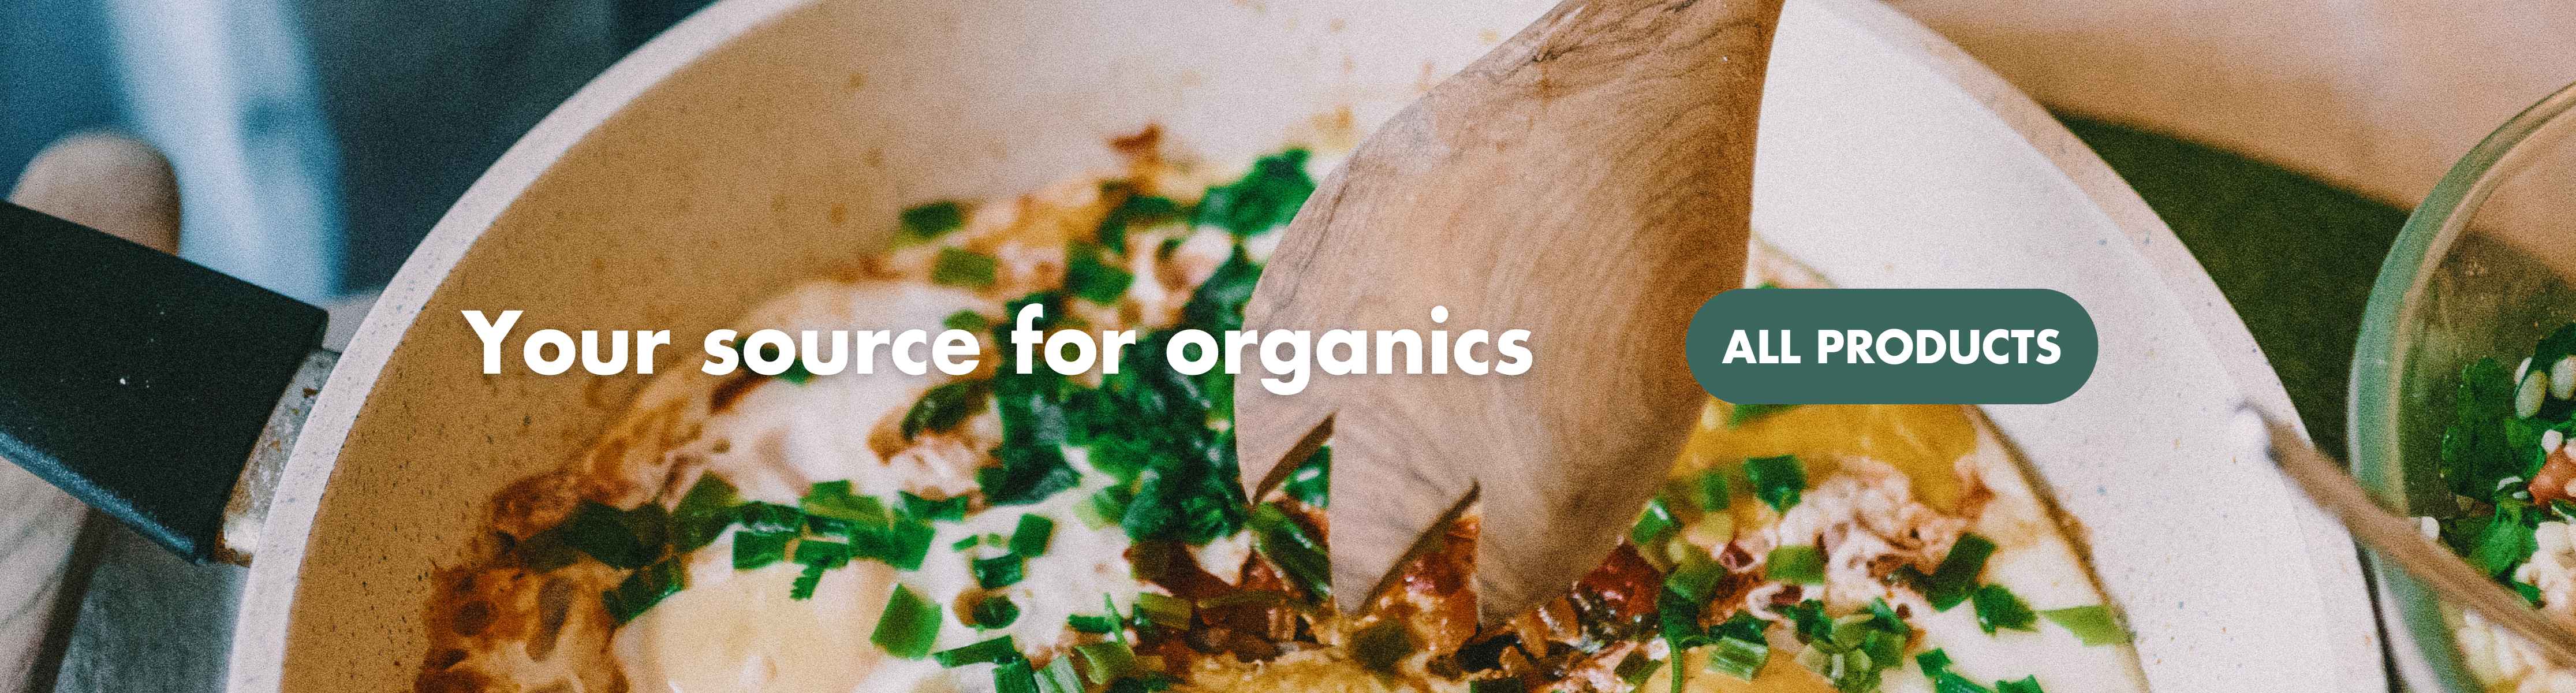 Organic Grocery Products throughout the World